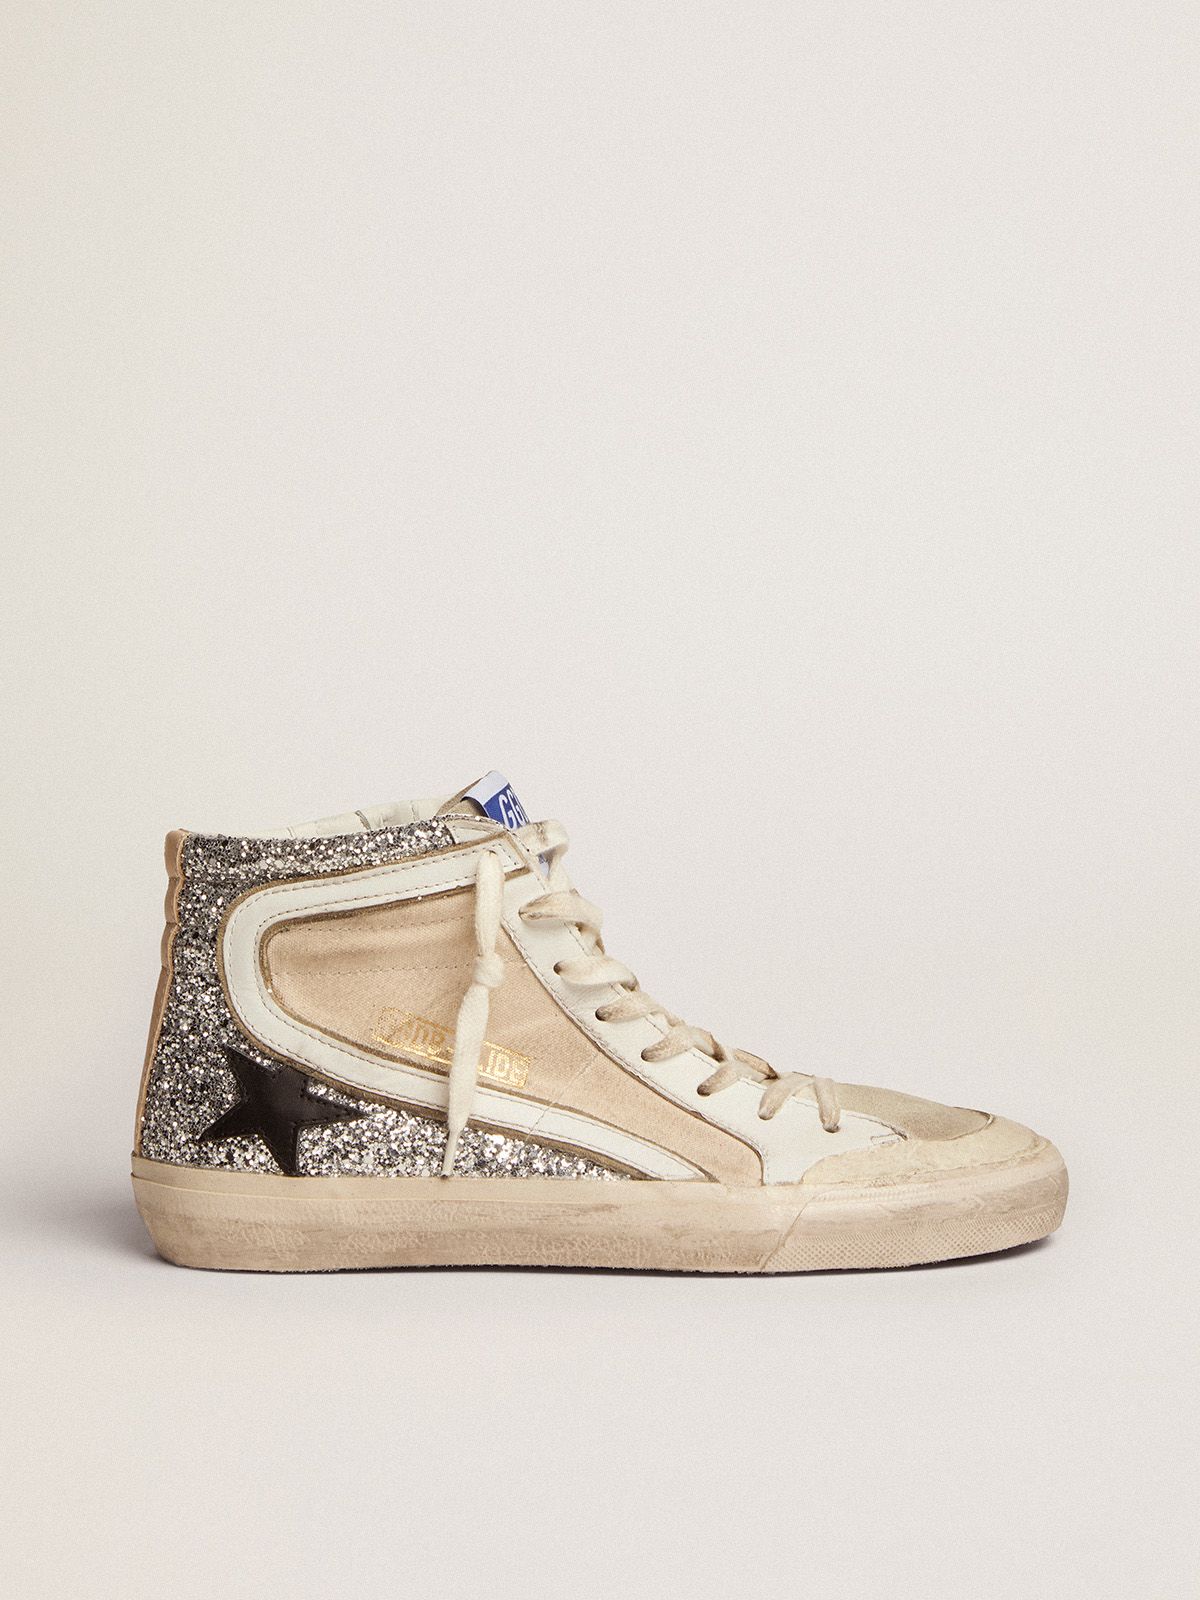 Golden Goose Bambina Penstar Slide sneakers in cream-colored canvas and silver glitter with black leather star